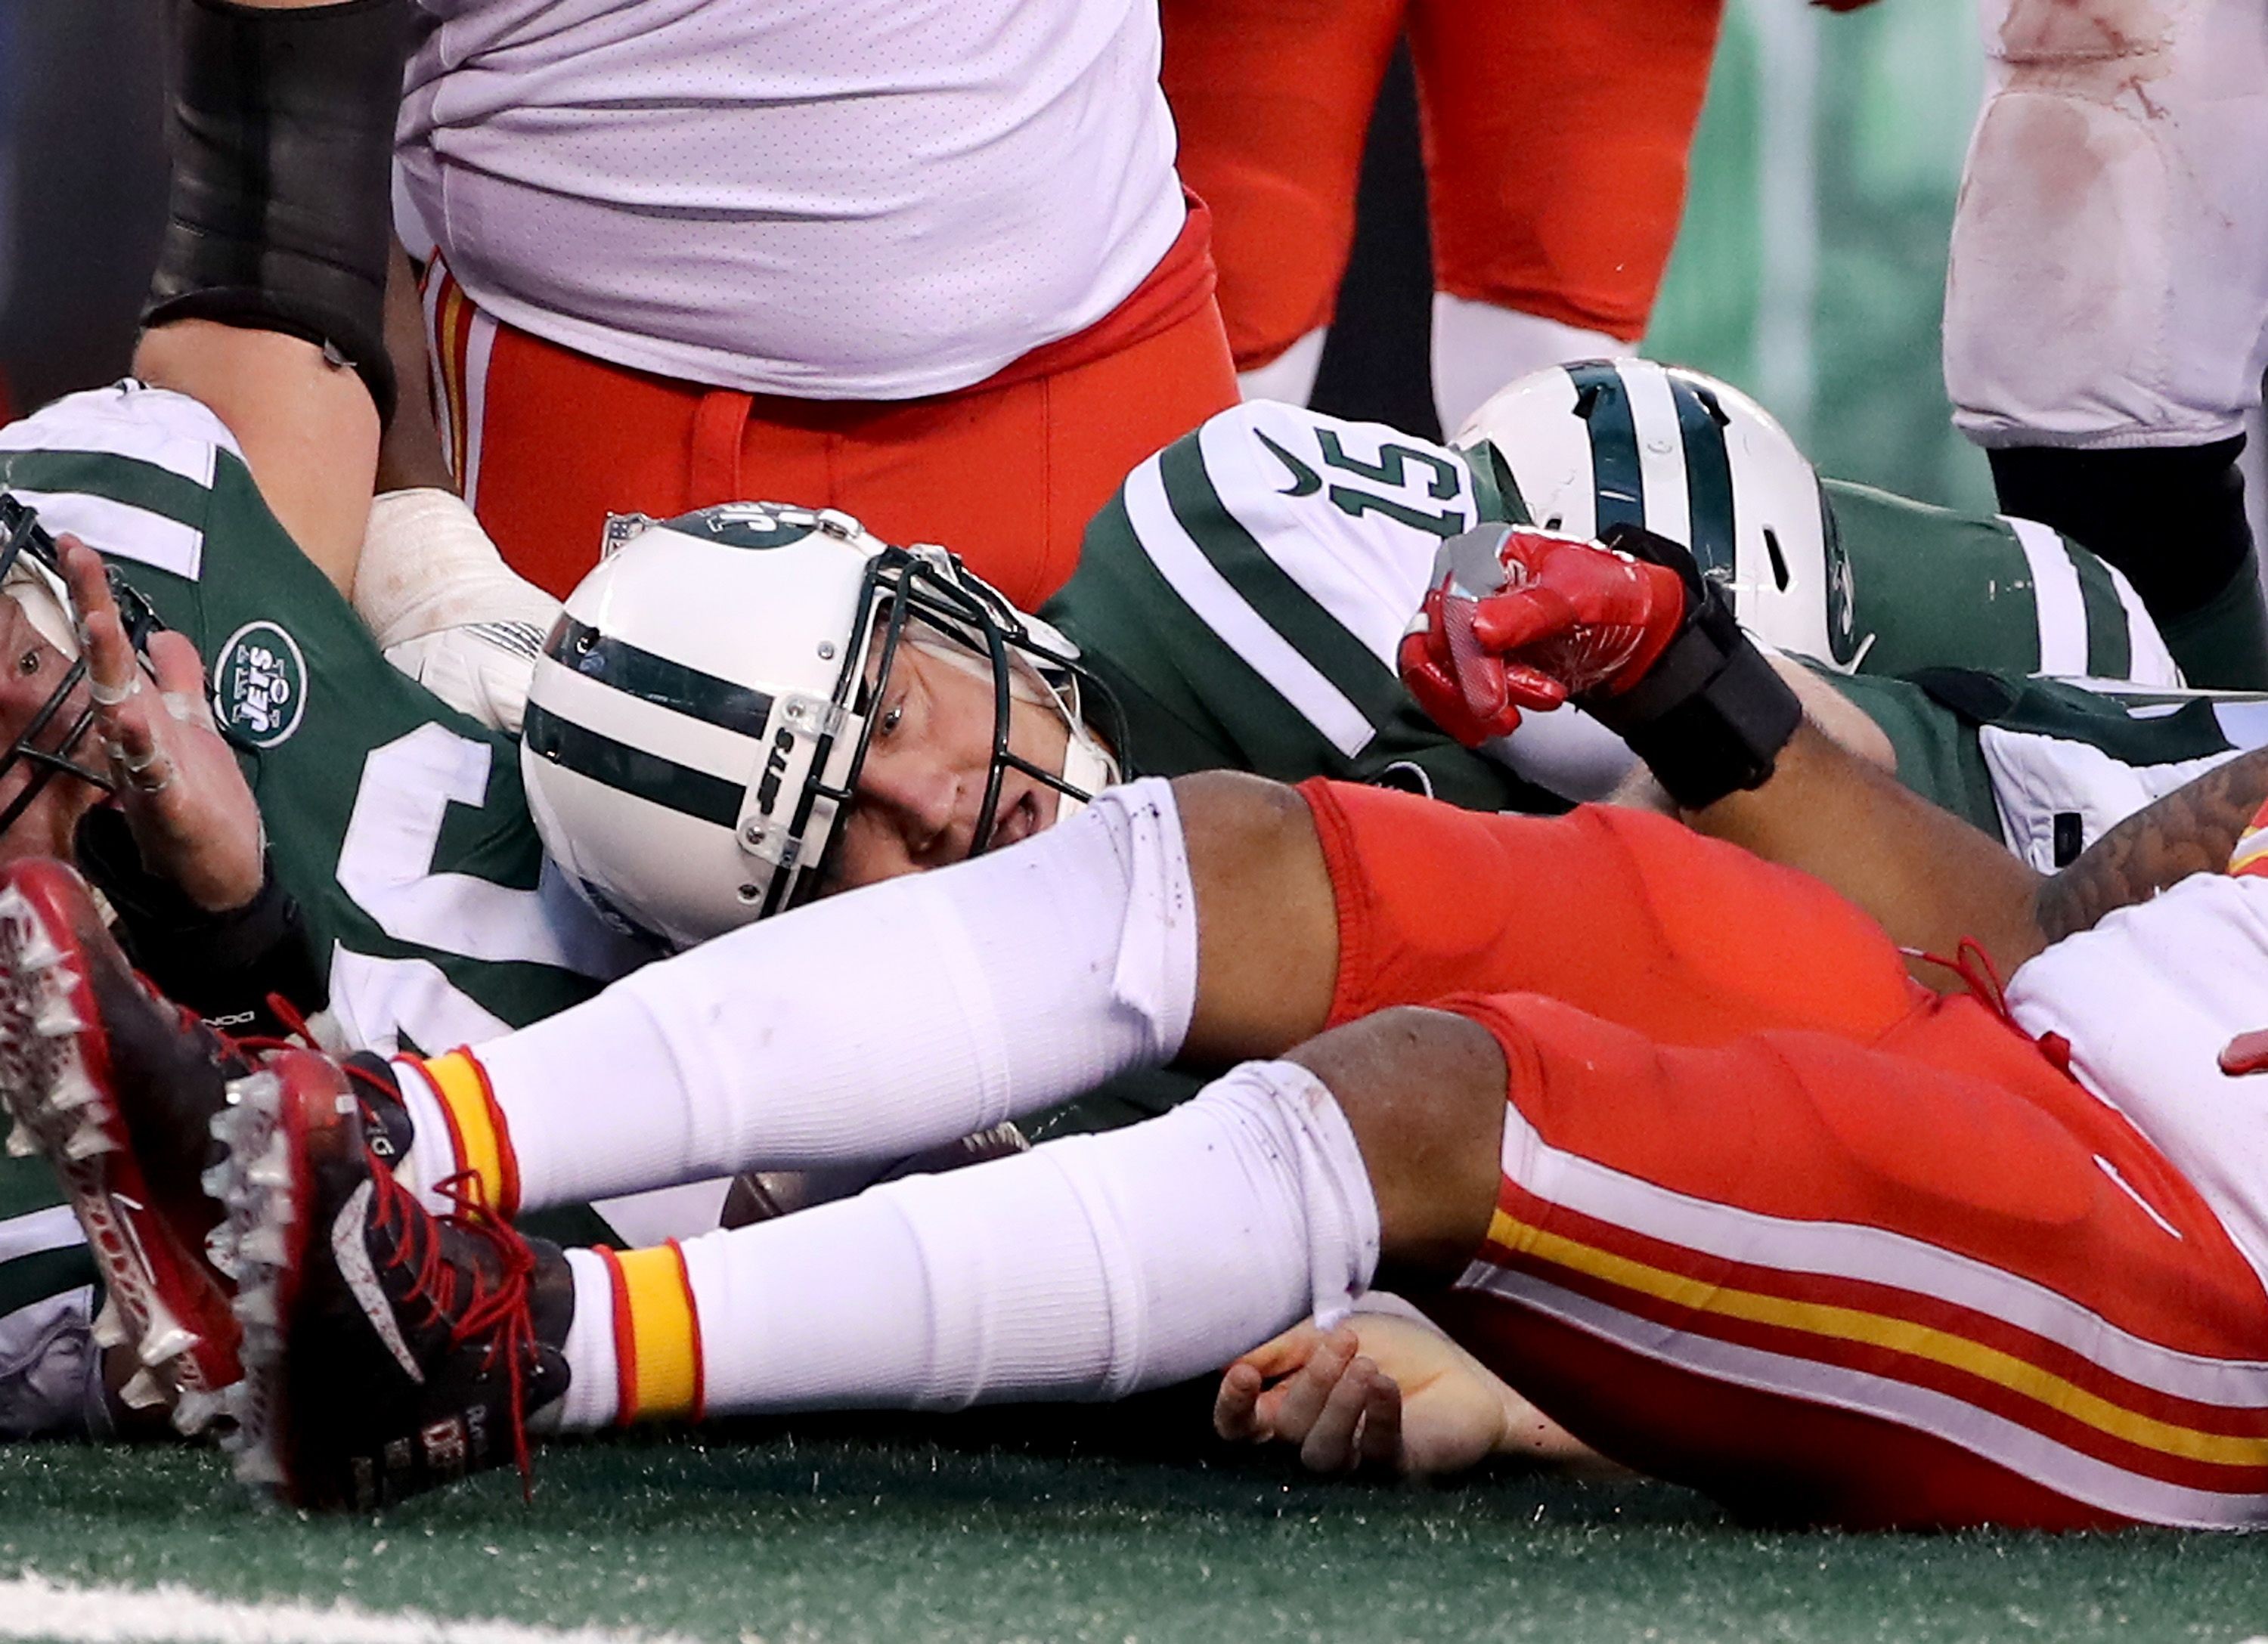 Chiefs vs. Jets: A play-by-play of the never-ending end zone drive